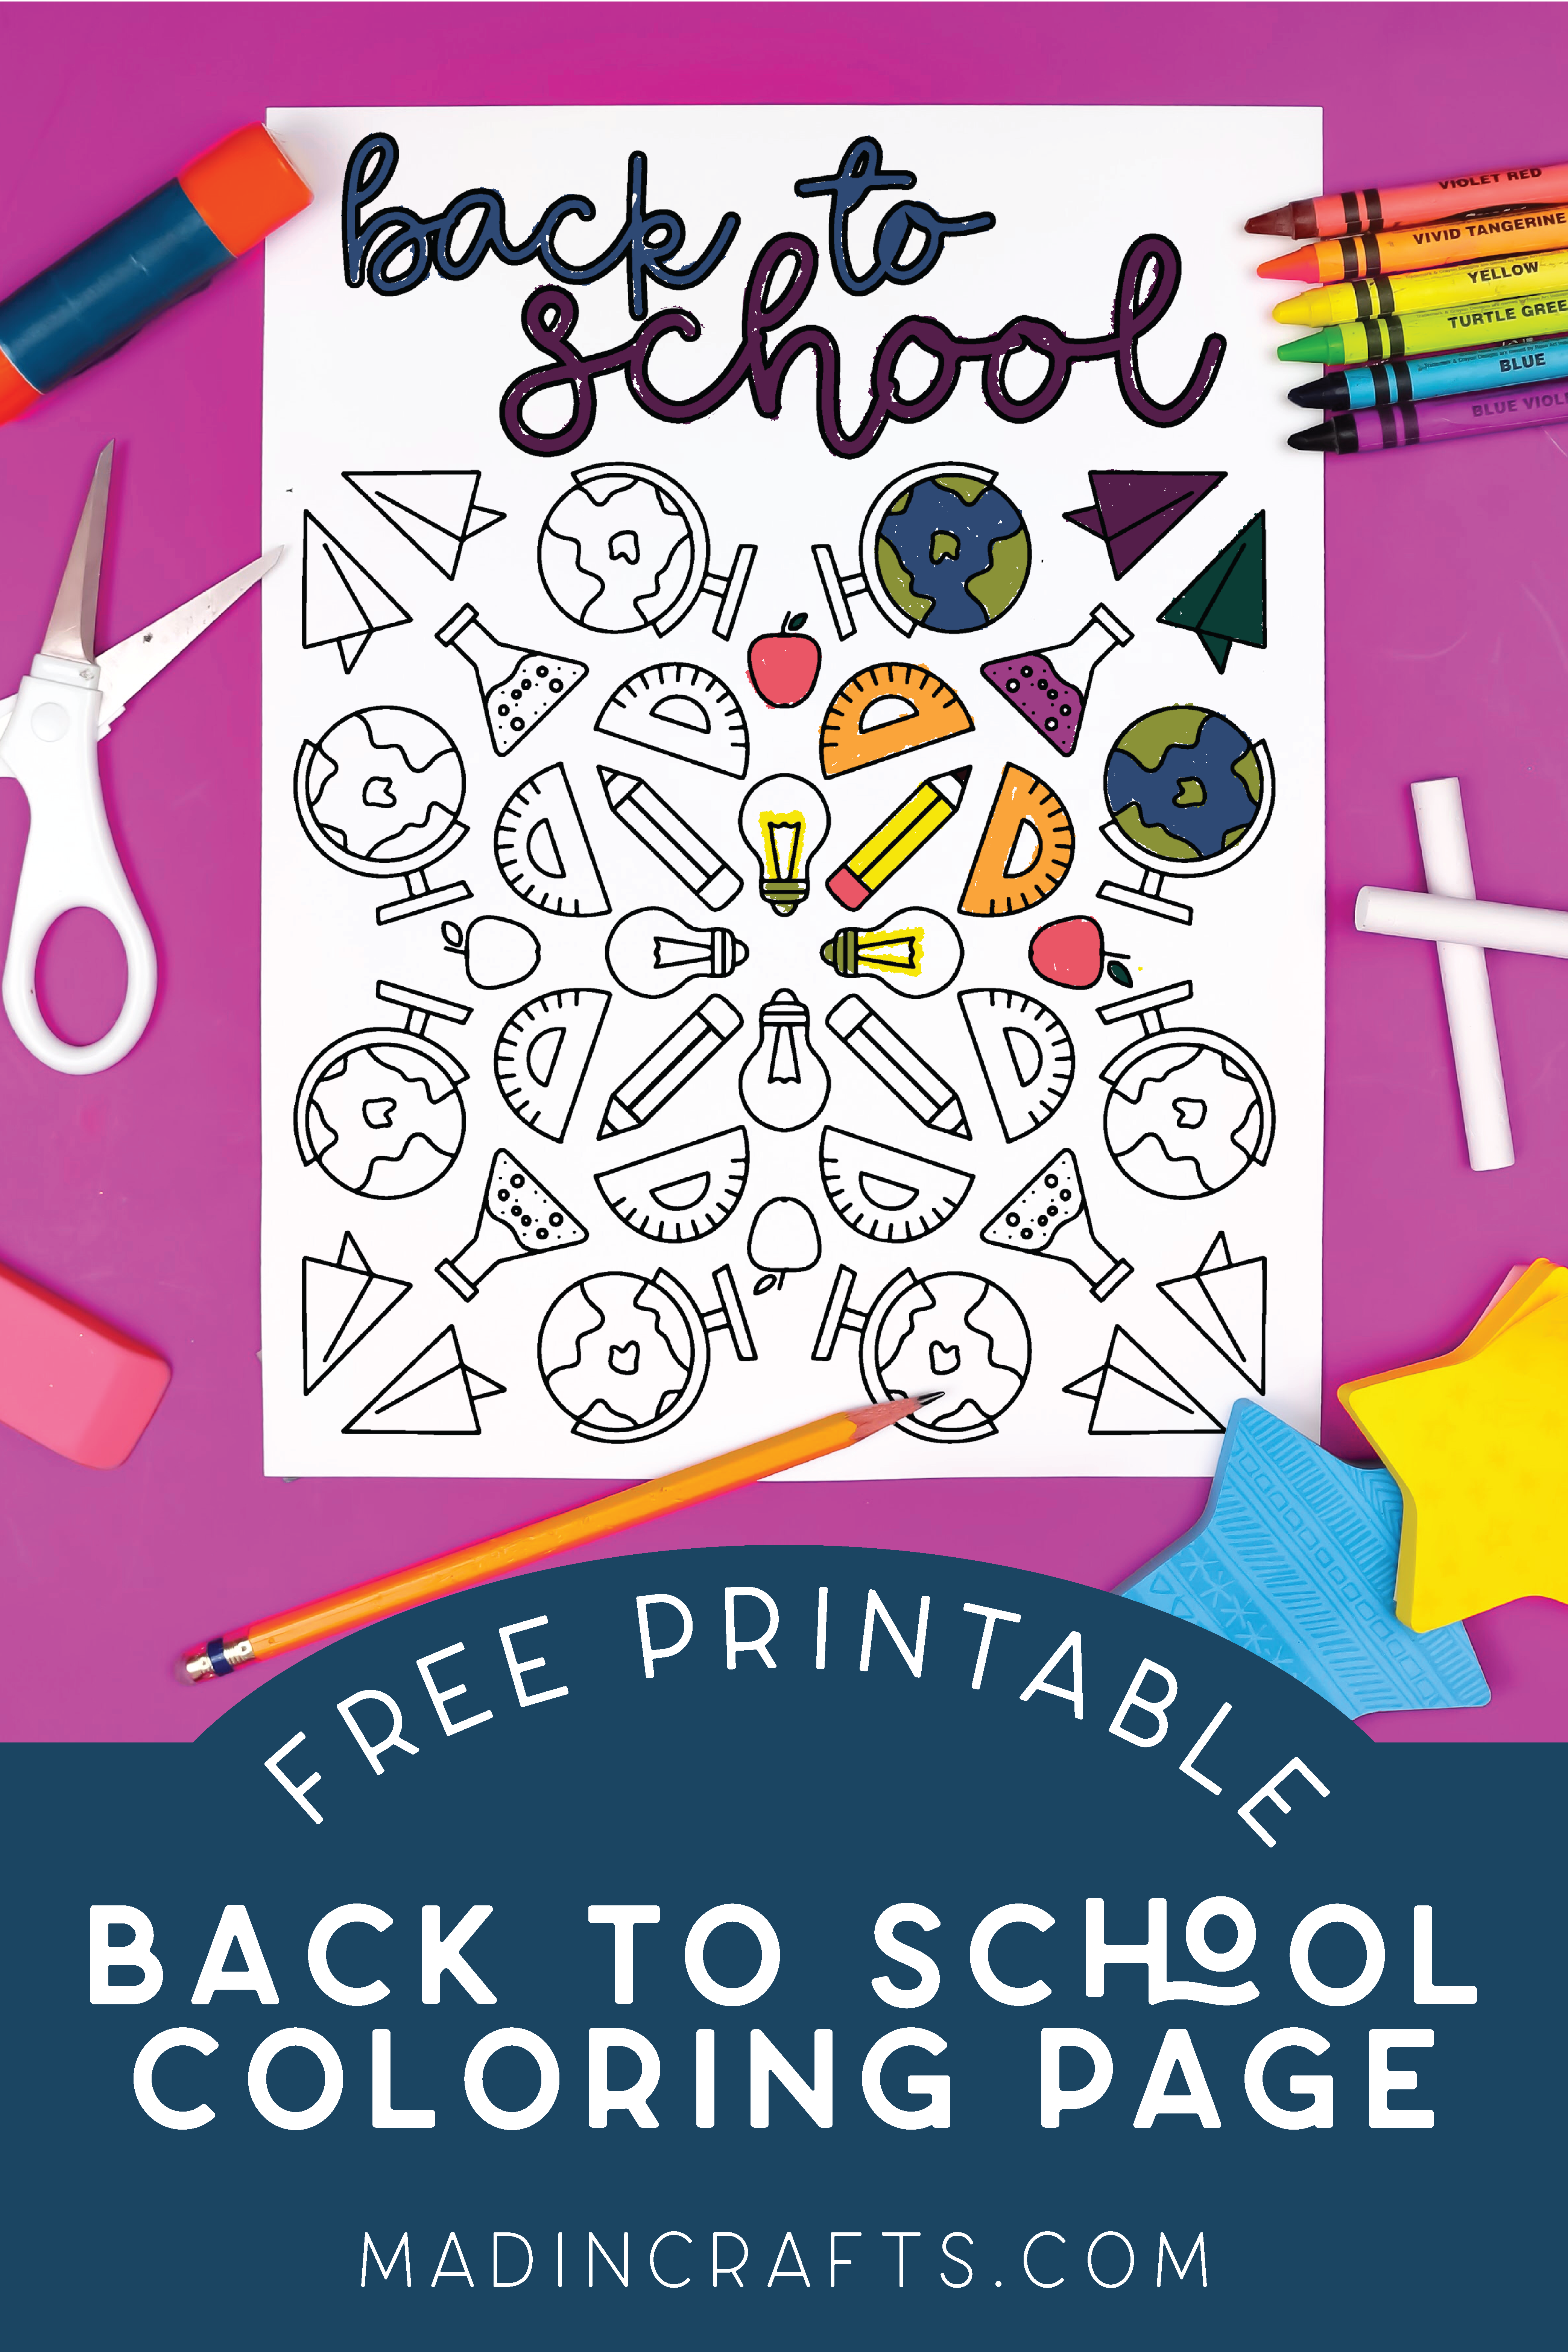 School coloring page with crayons, scissors and other school supplies